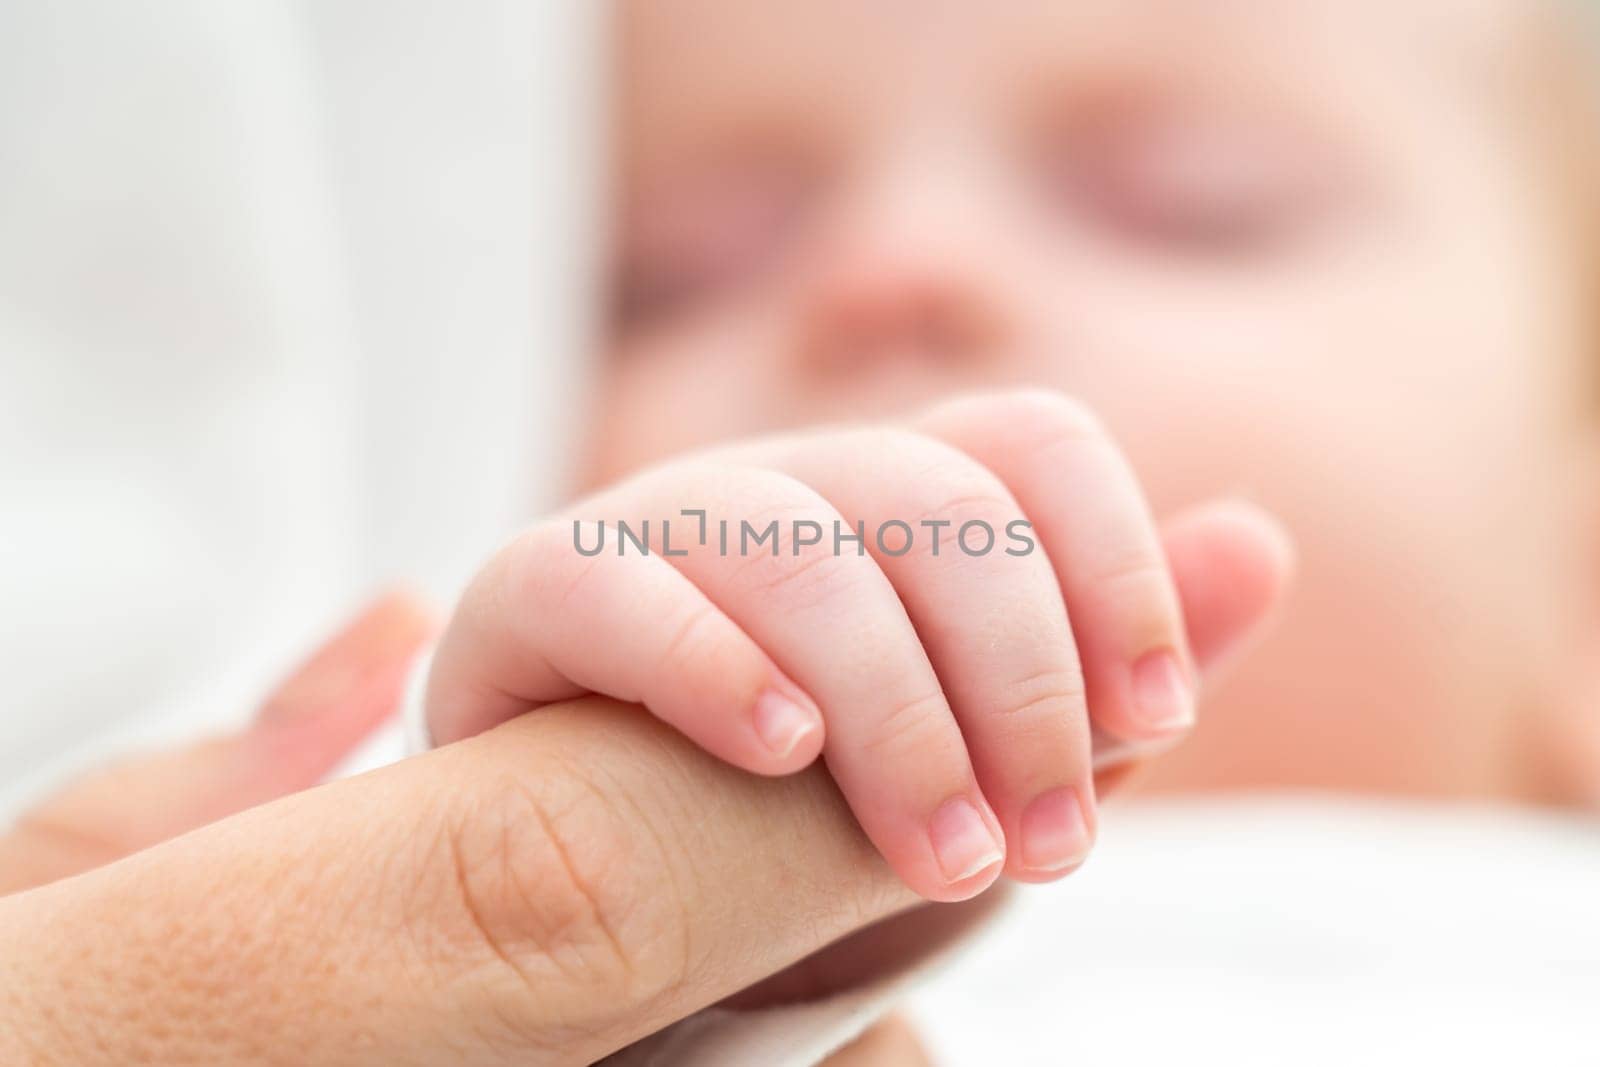 The tender touch of a sleeping newborn, tightly holding the mother's finger, embodies love and assurance